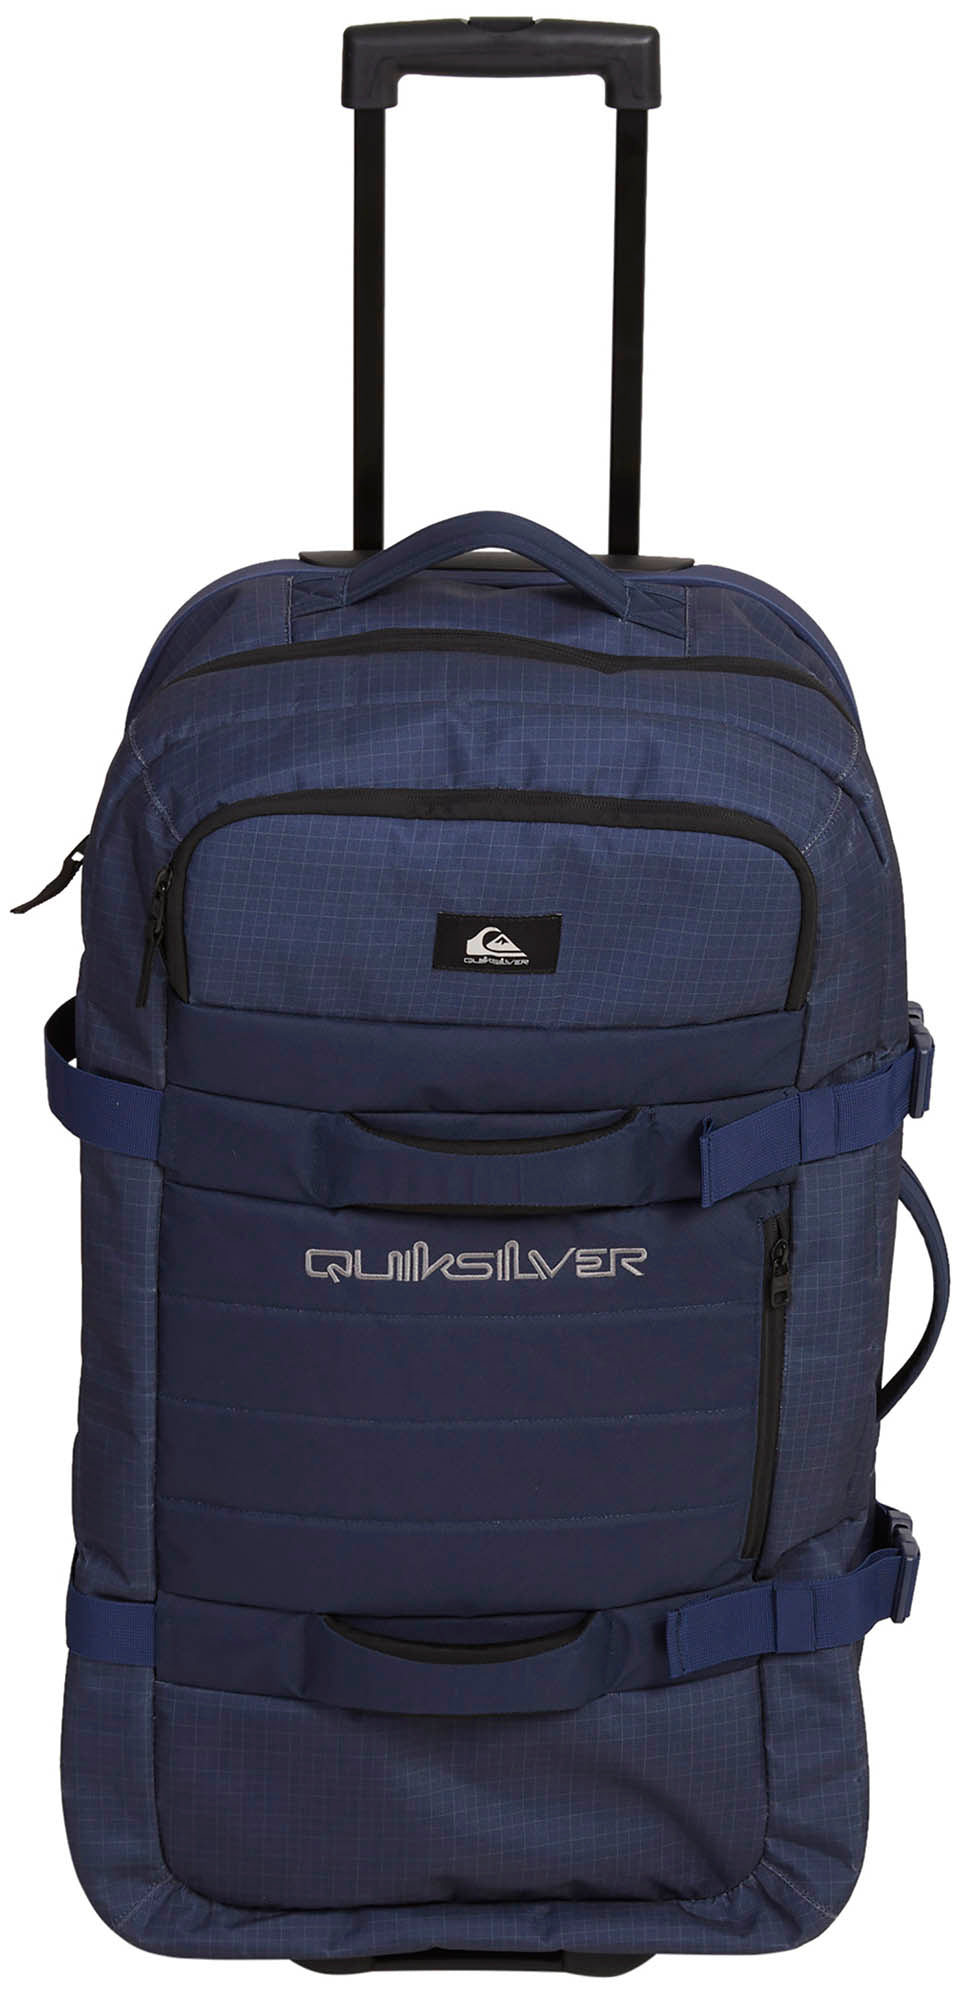 Quiksilver New Reach Naval 100L Suitcase - – Academy thebackpacker